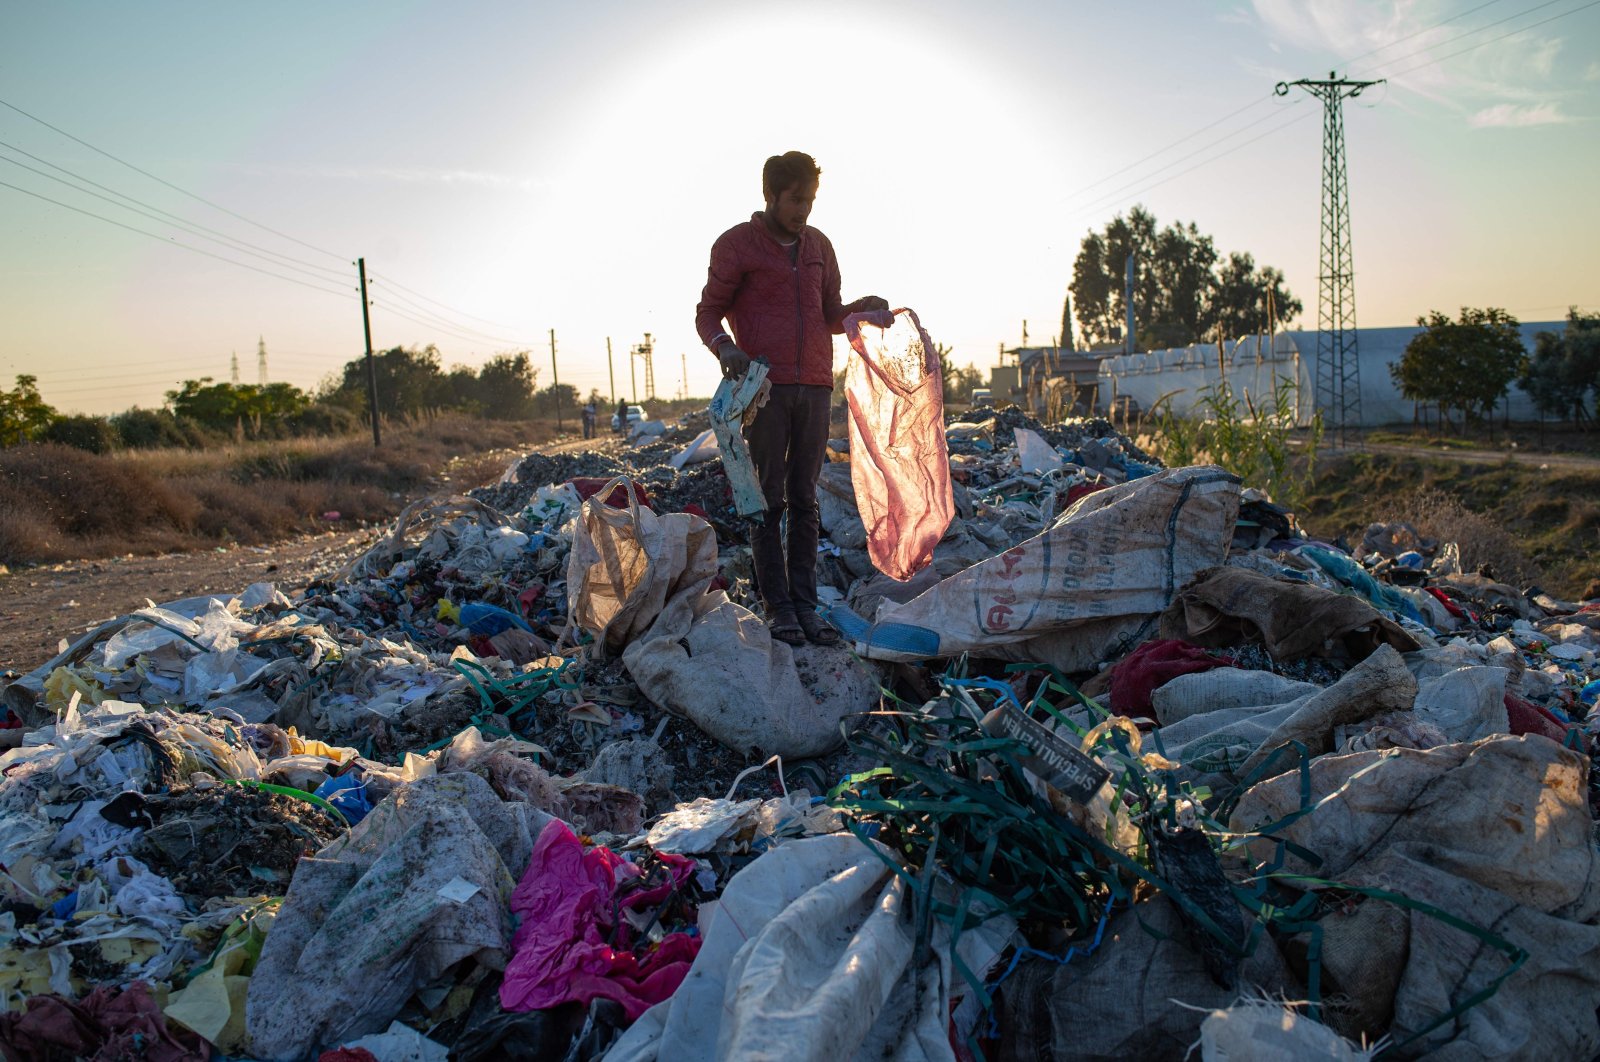 A man collects items from an illegal dump in Adana, southern Turkey, on November 29, 2020. (AFP Photo)